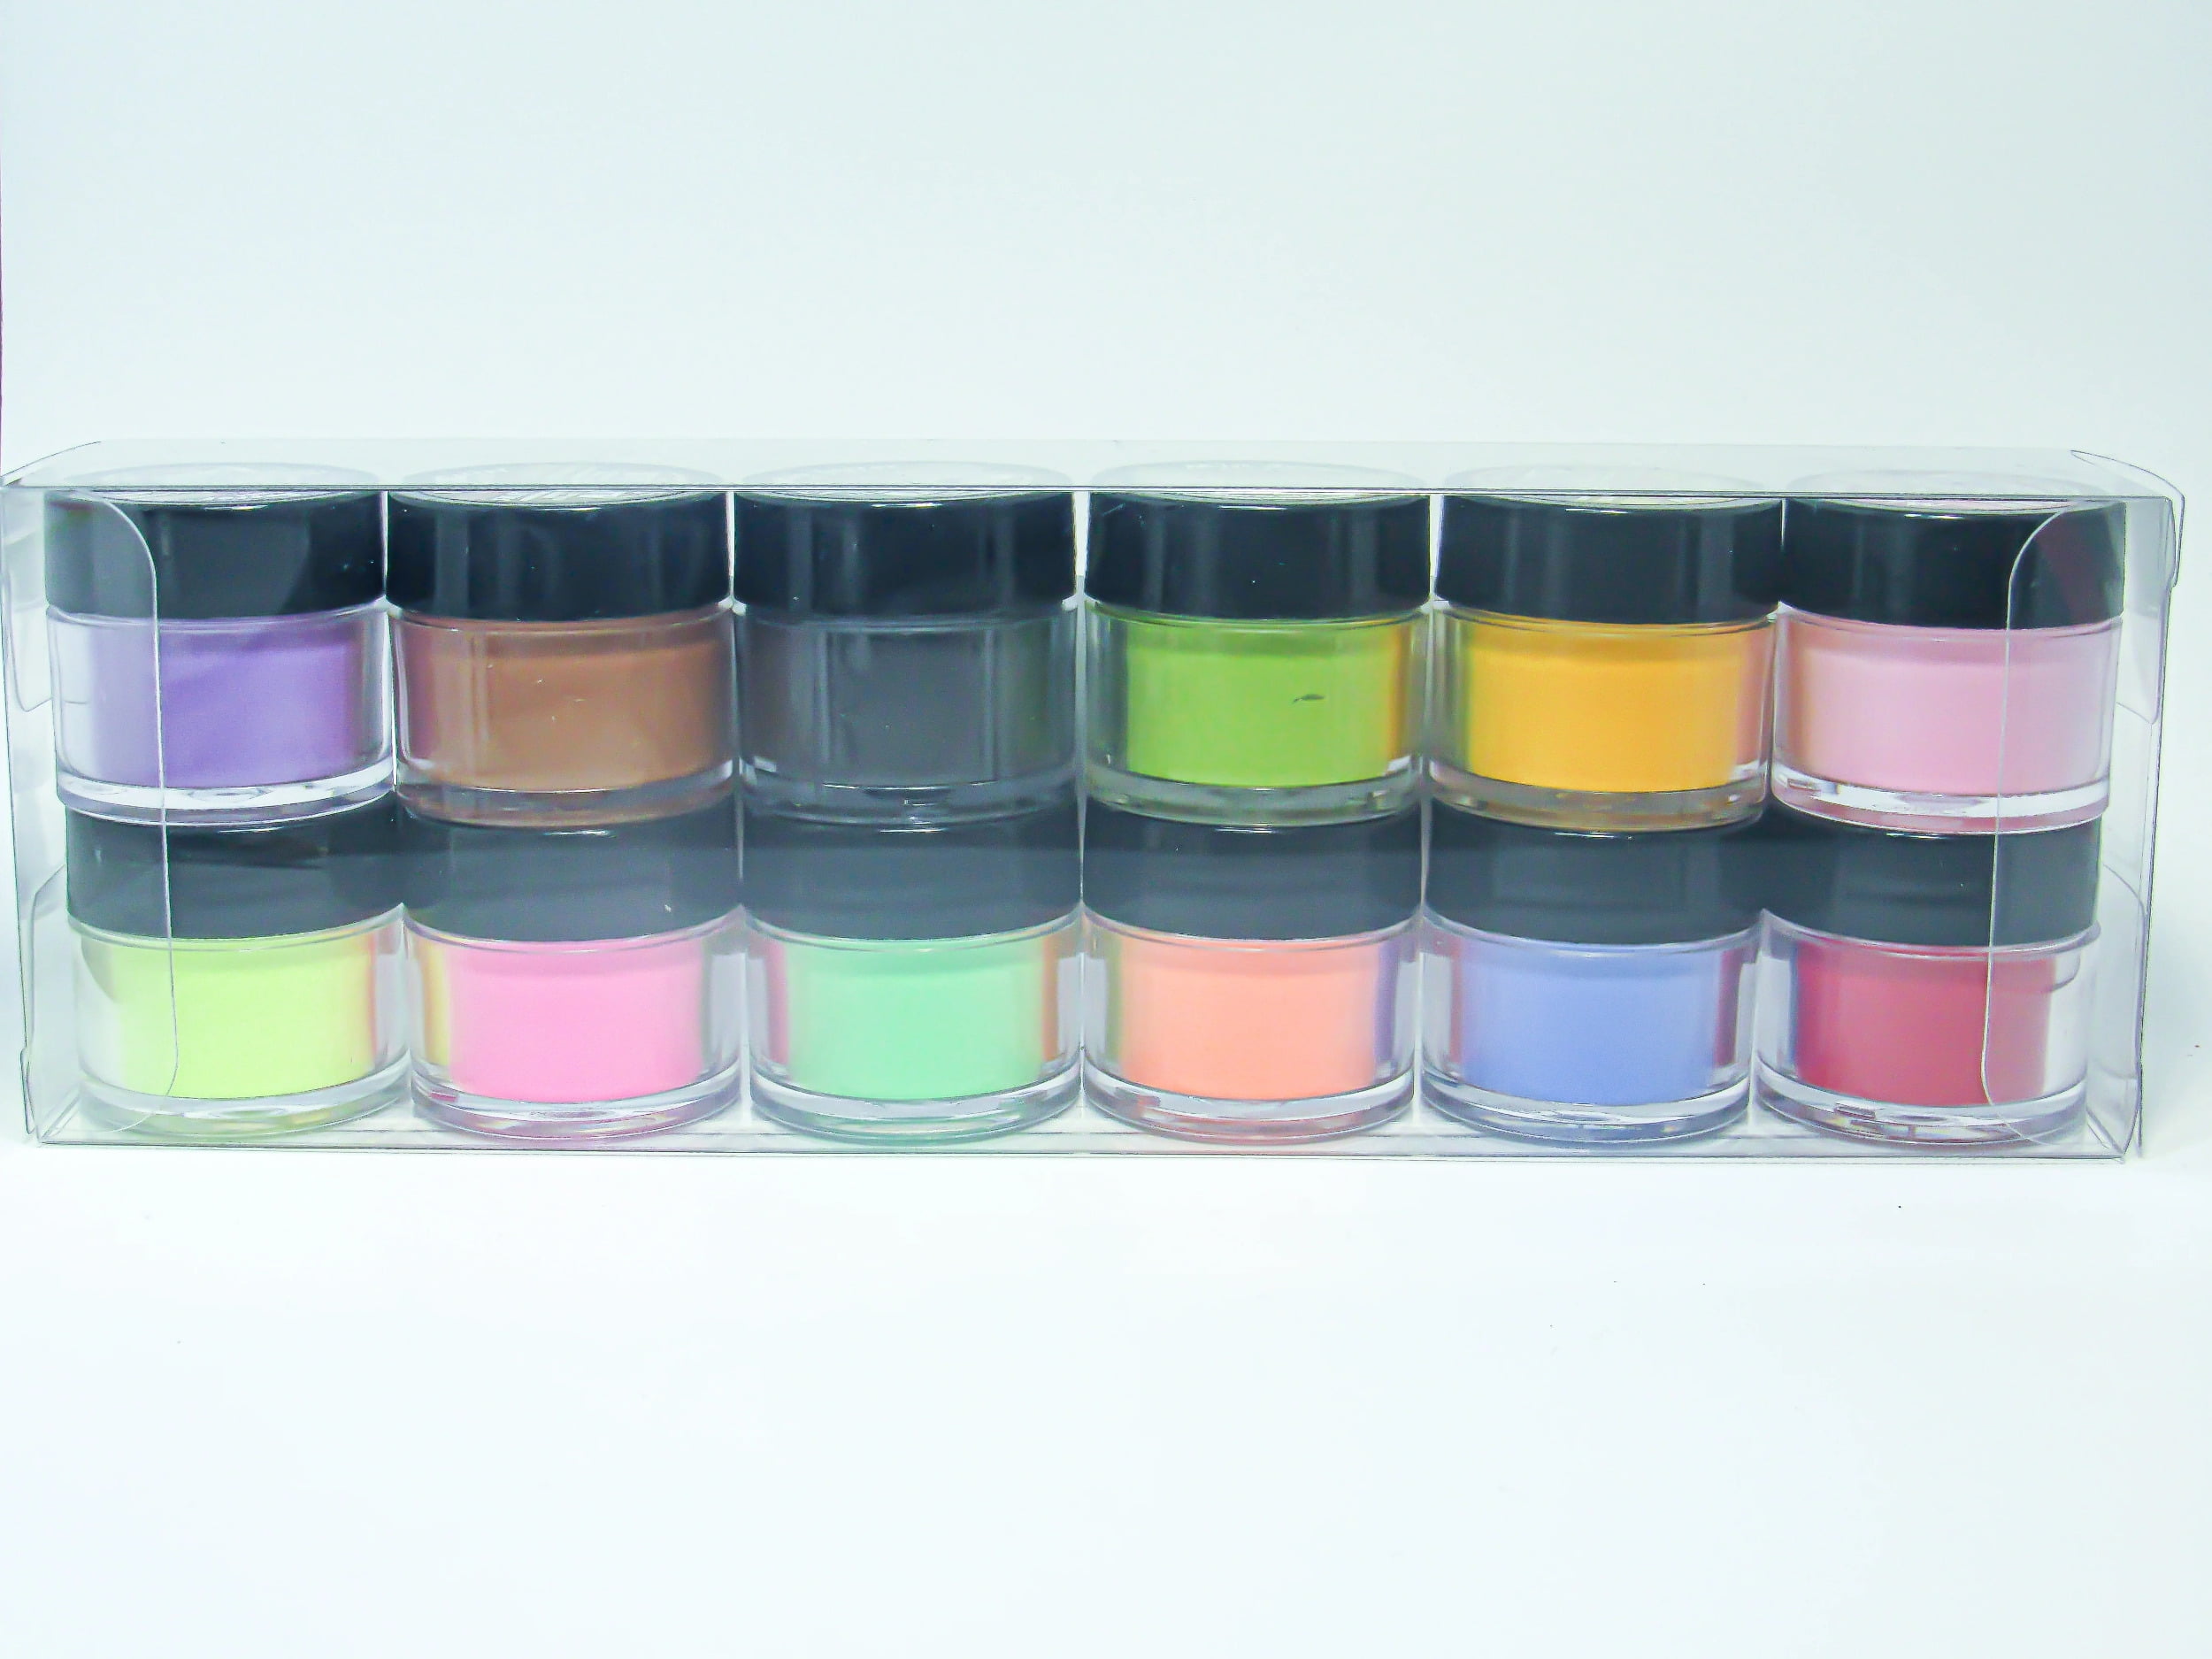  Mia Secret GLITTER Acrylic Powder Collection (12 pc) Nail Art  Powder Collection with 12 unique colors MADE IN USA : Beauty & Personal Care